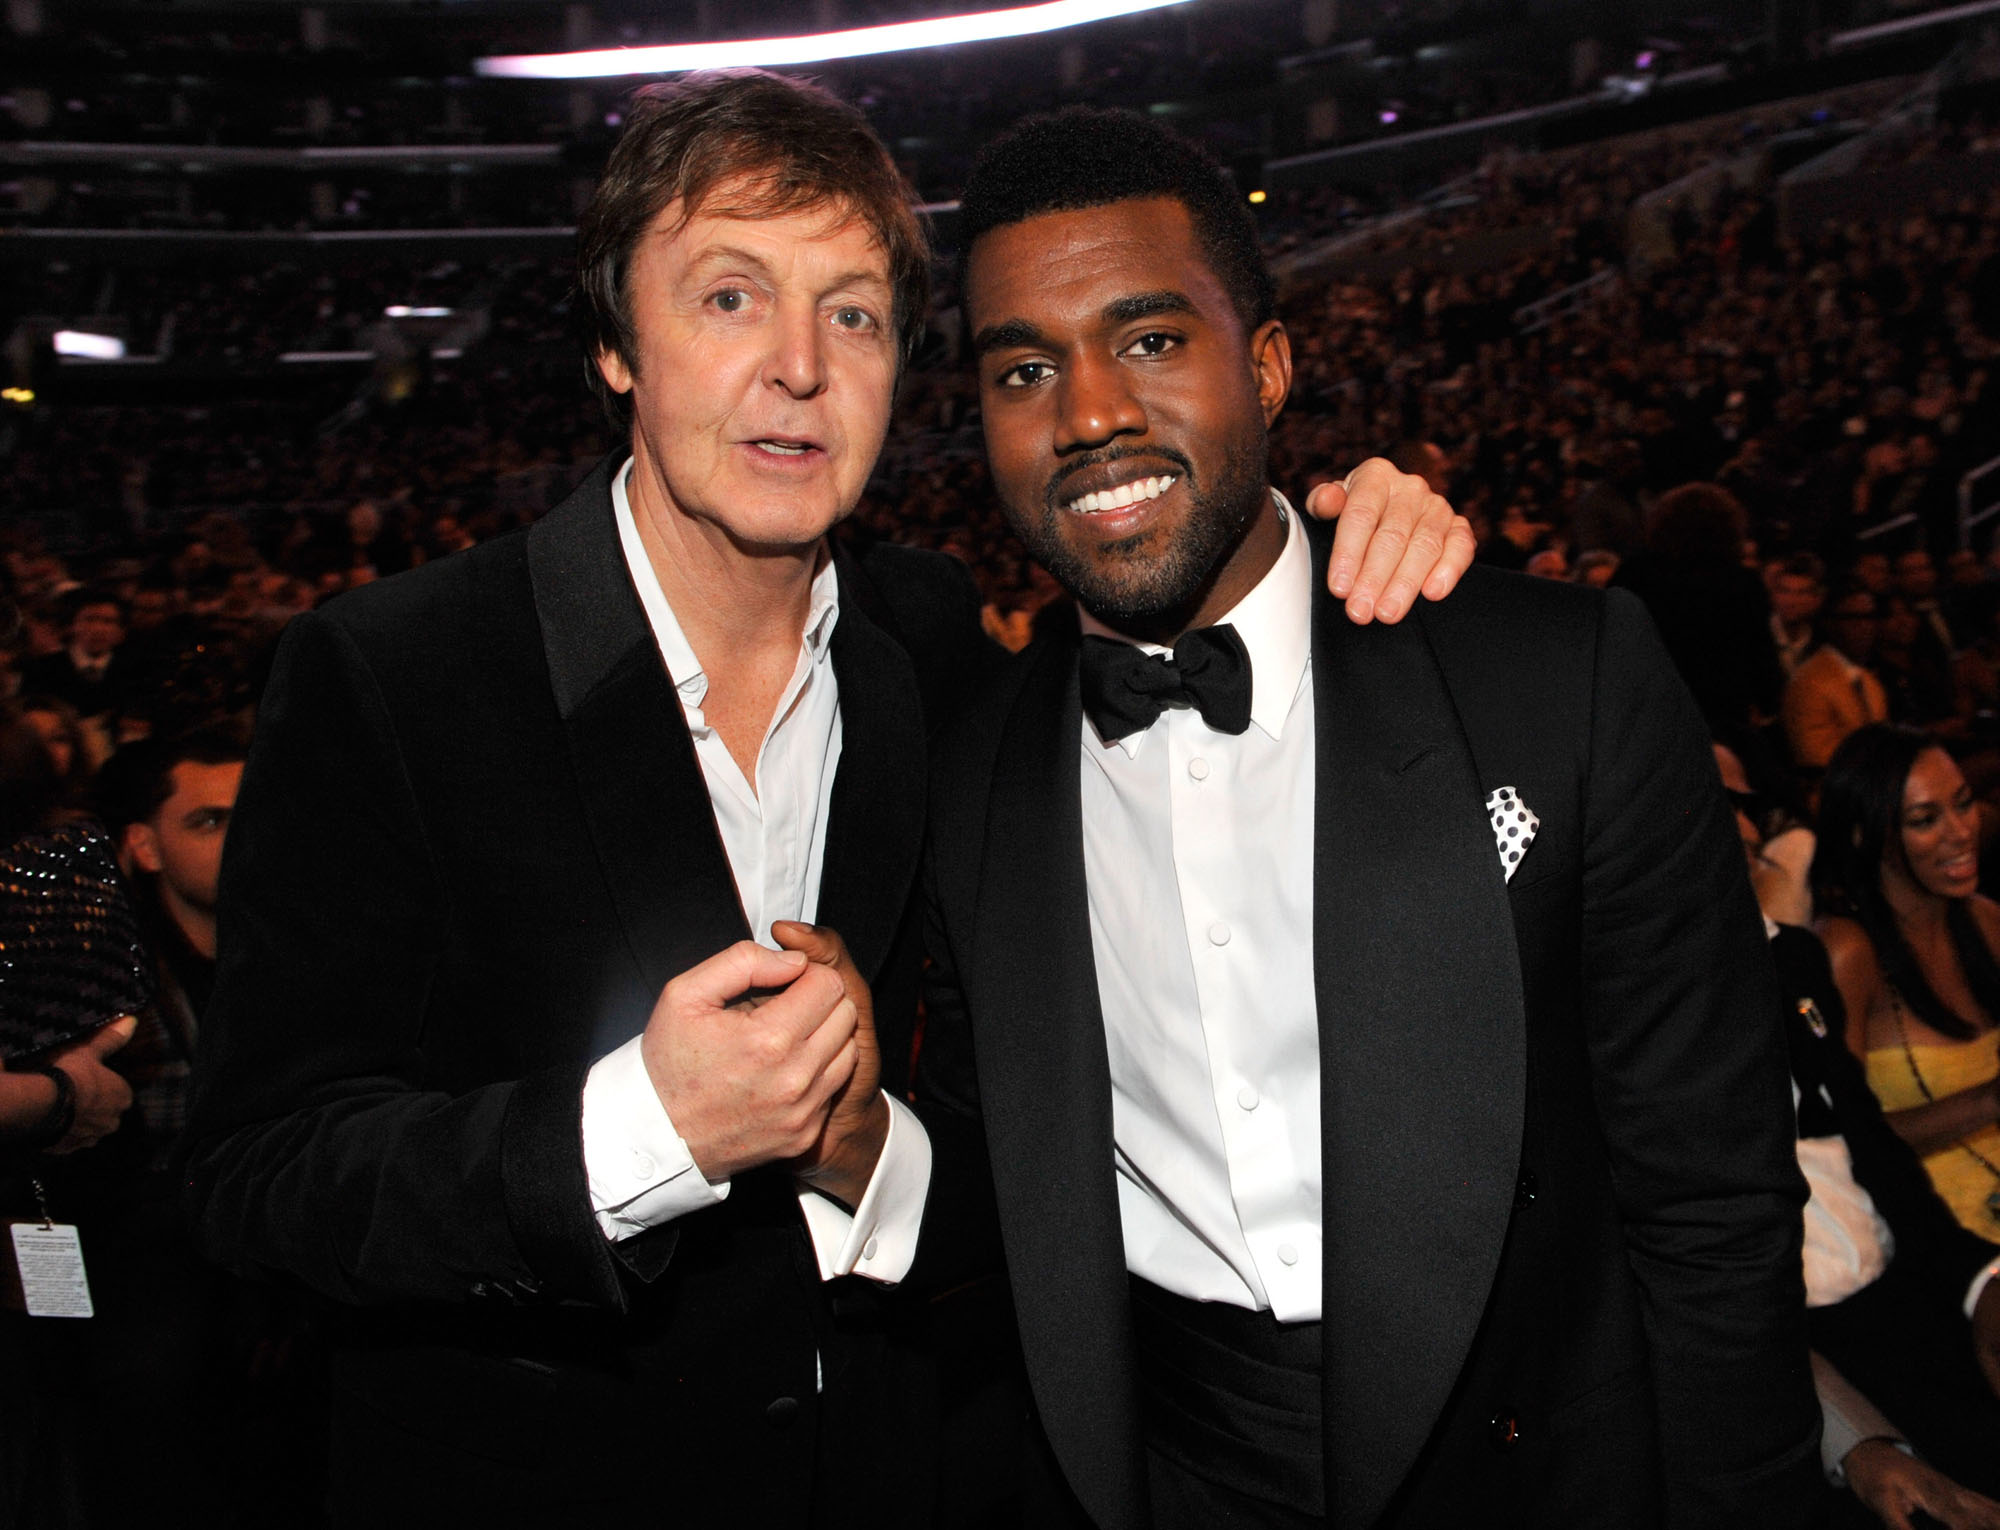 Sir Paul McCartney and Kanye West at the 51st Annual Grammy Awards at the Staples Center in Los Angeles on Feb. 8, 2009. (Kevin Mazur—WireImage/Getty Images)